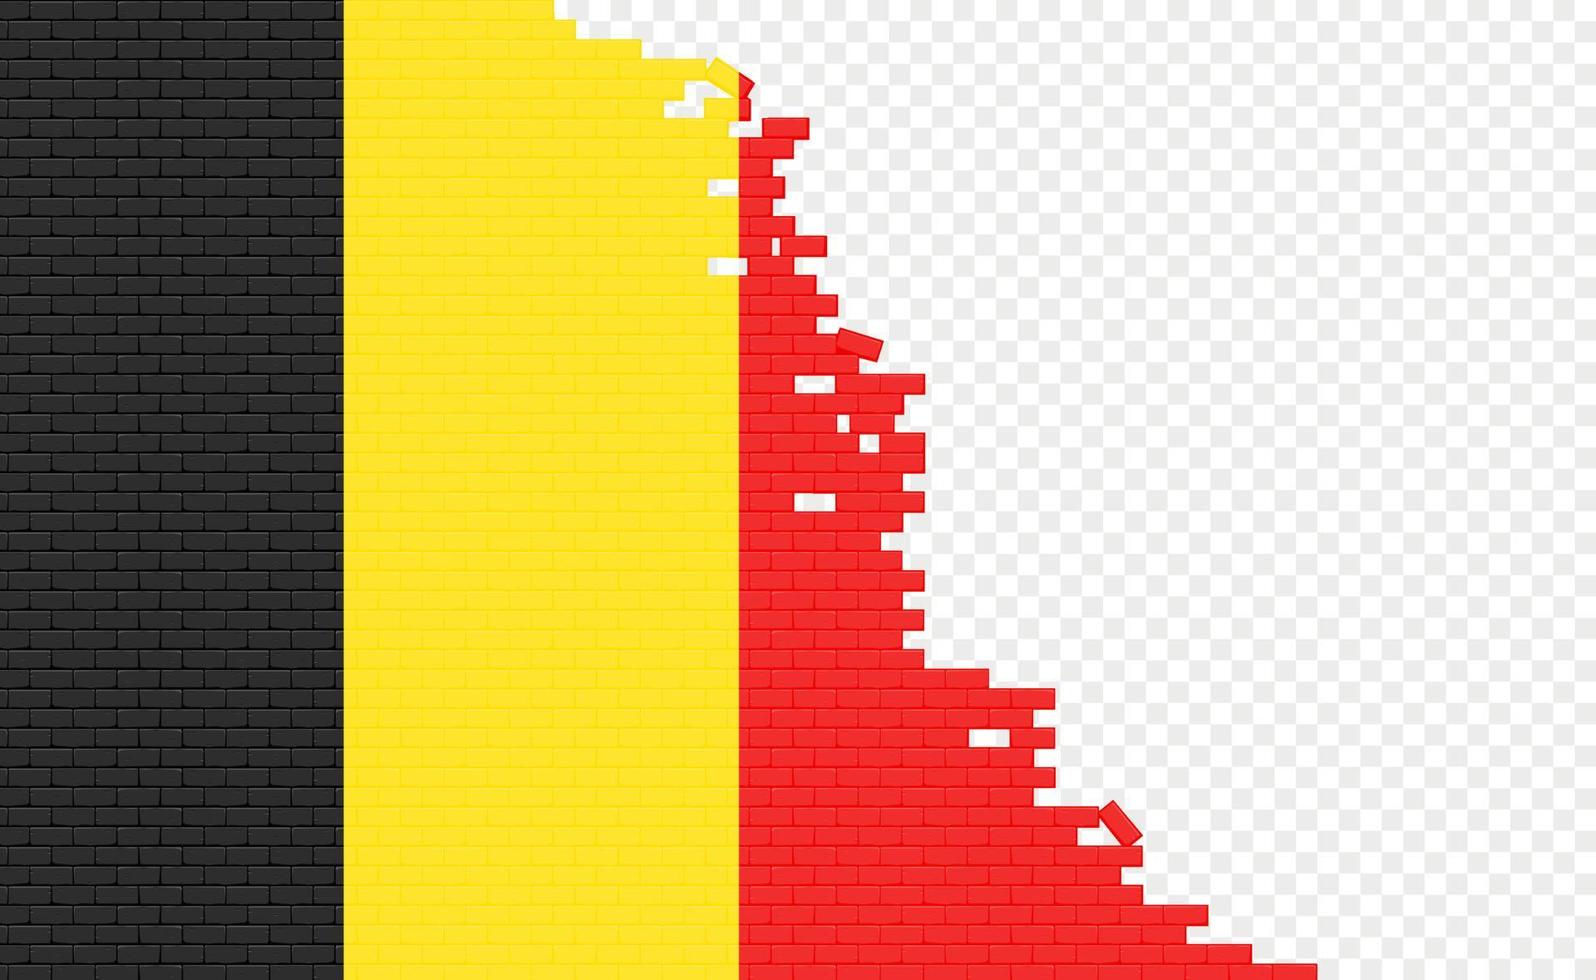 Belgium flag on broken brick wall. Empty flag field of another country. Country comparison. Easy editing and vector in groups.